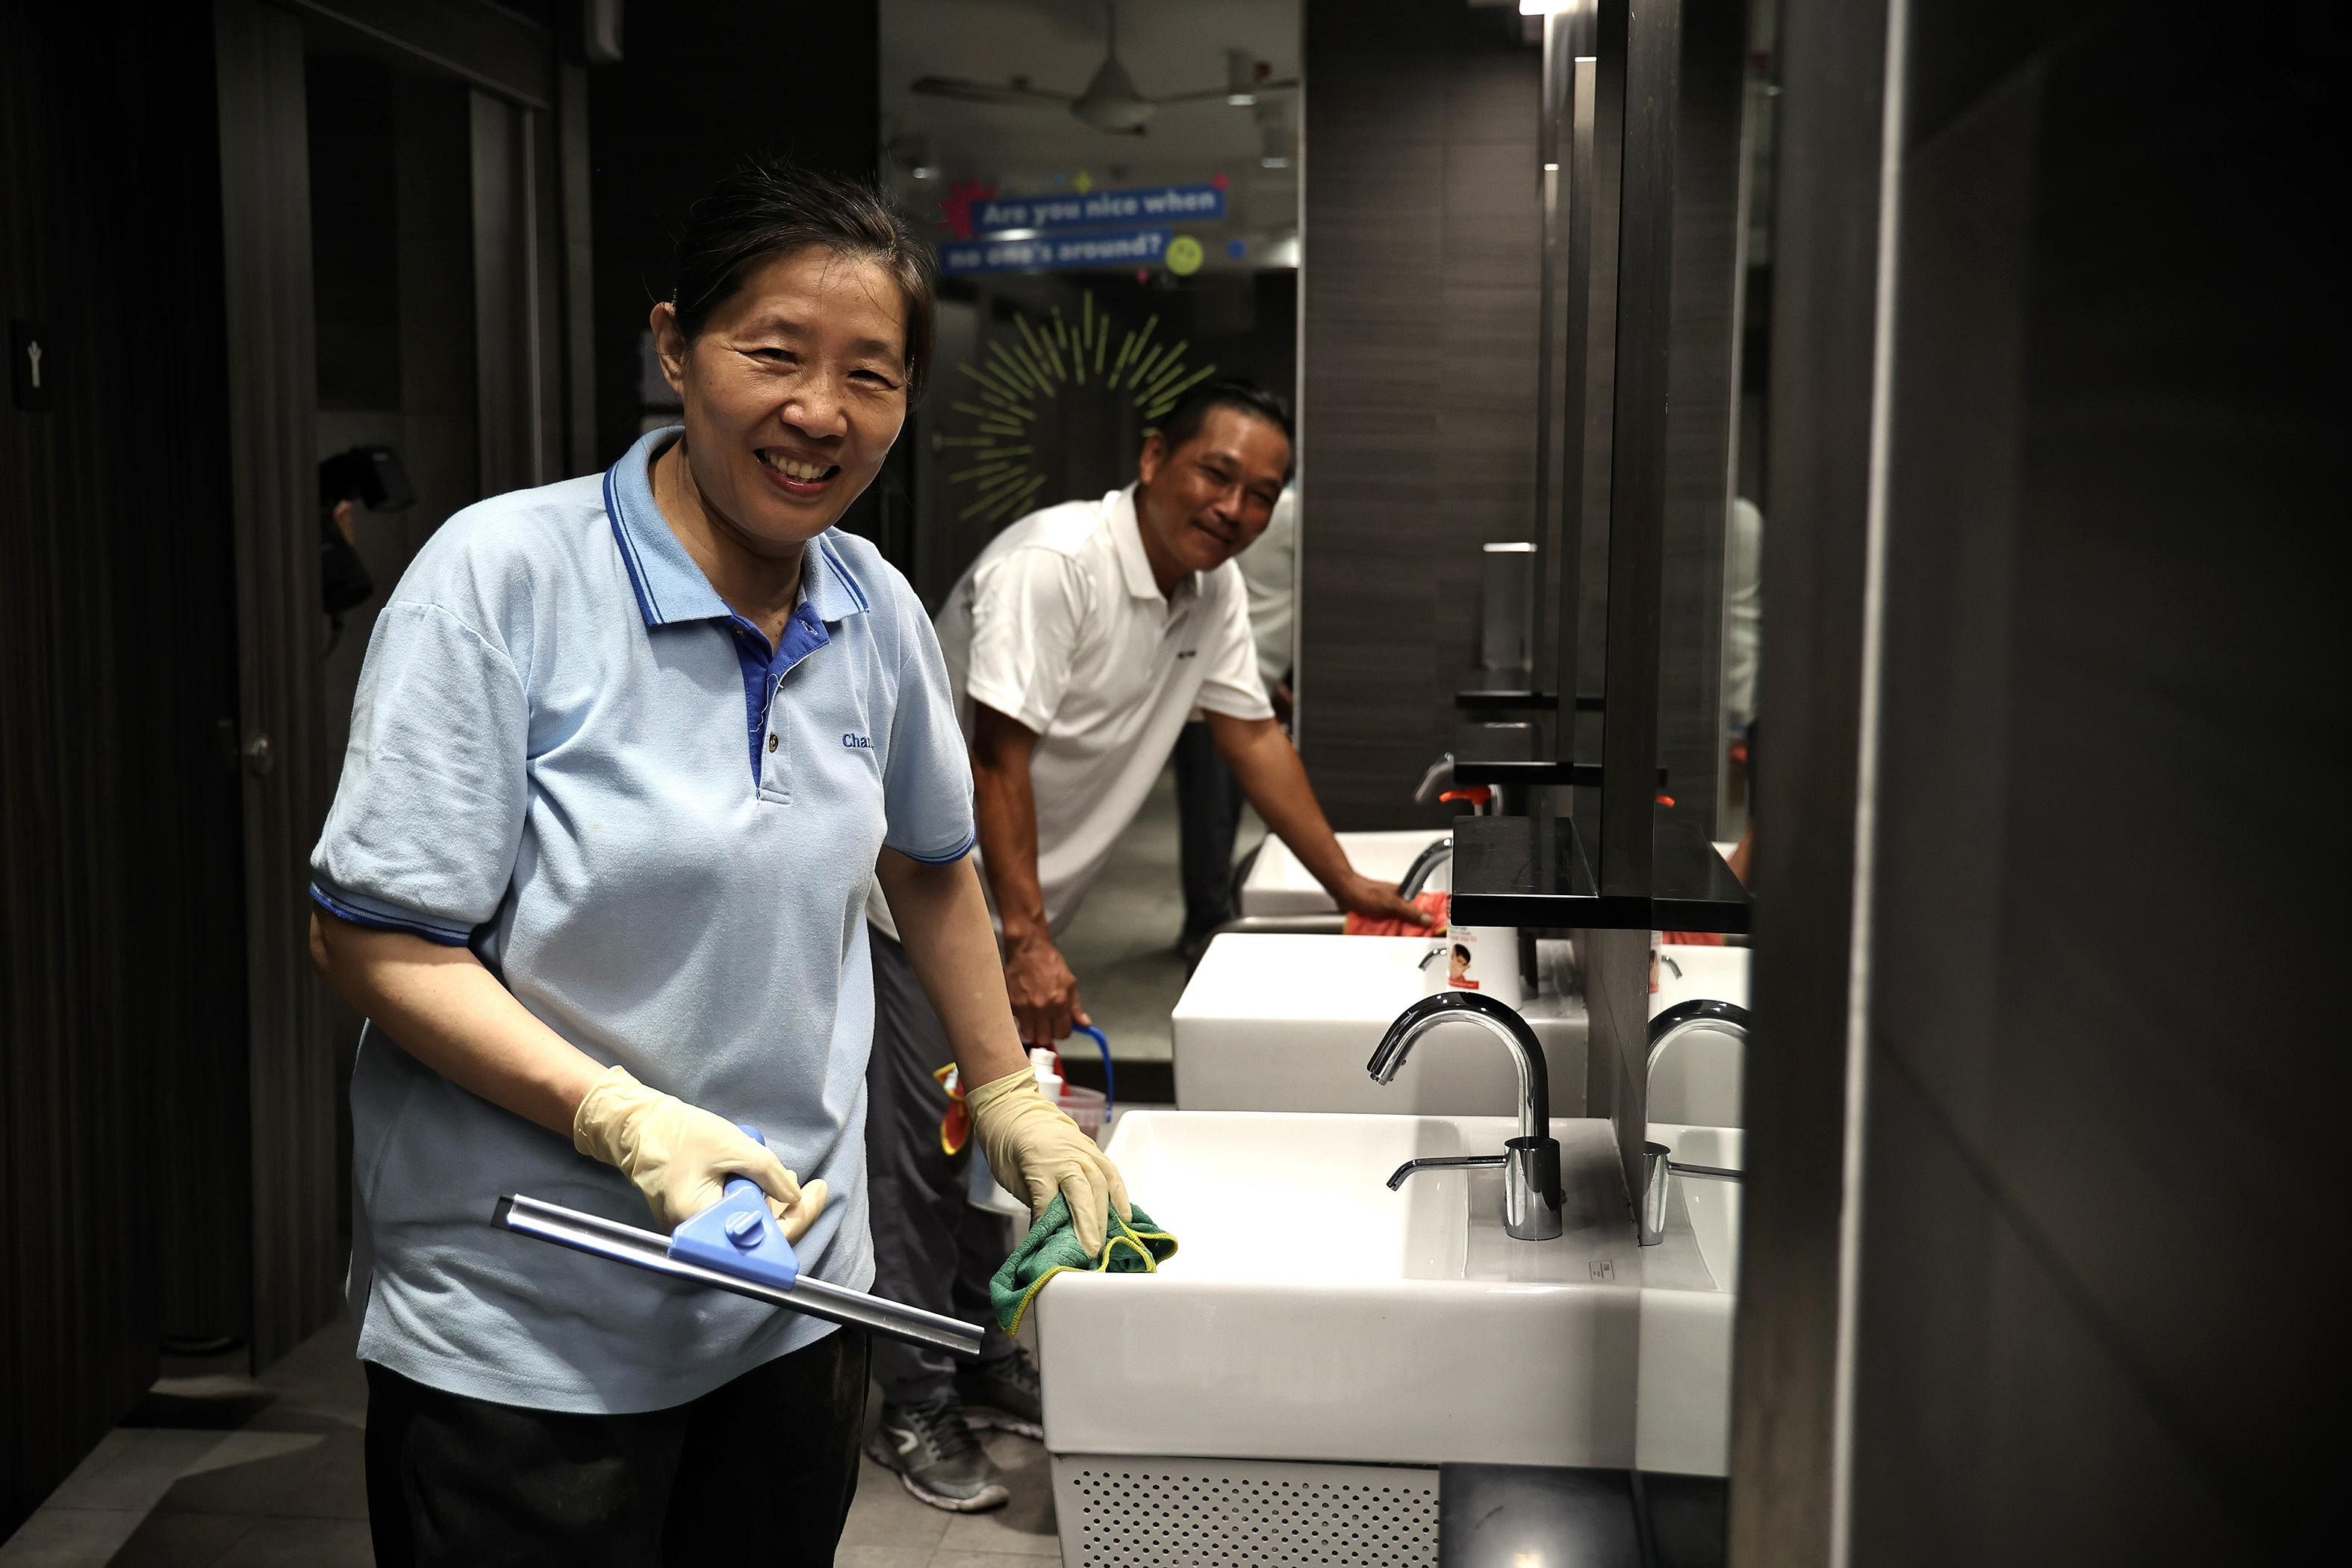 Fifth edition of NEA’s clean public toilets campaign to urge public to flush out bad habits